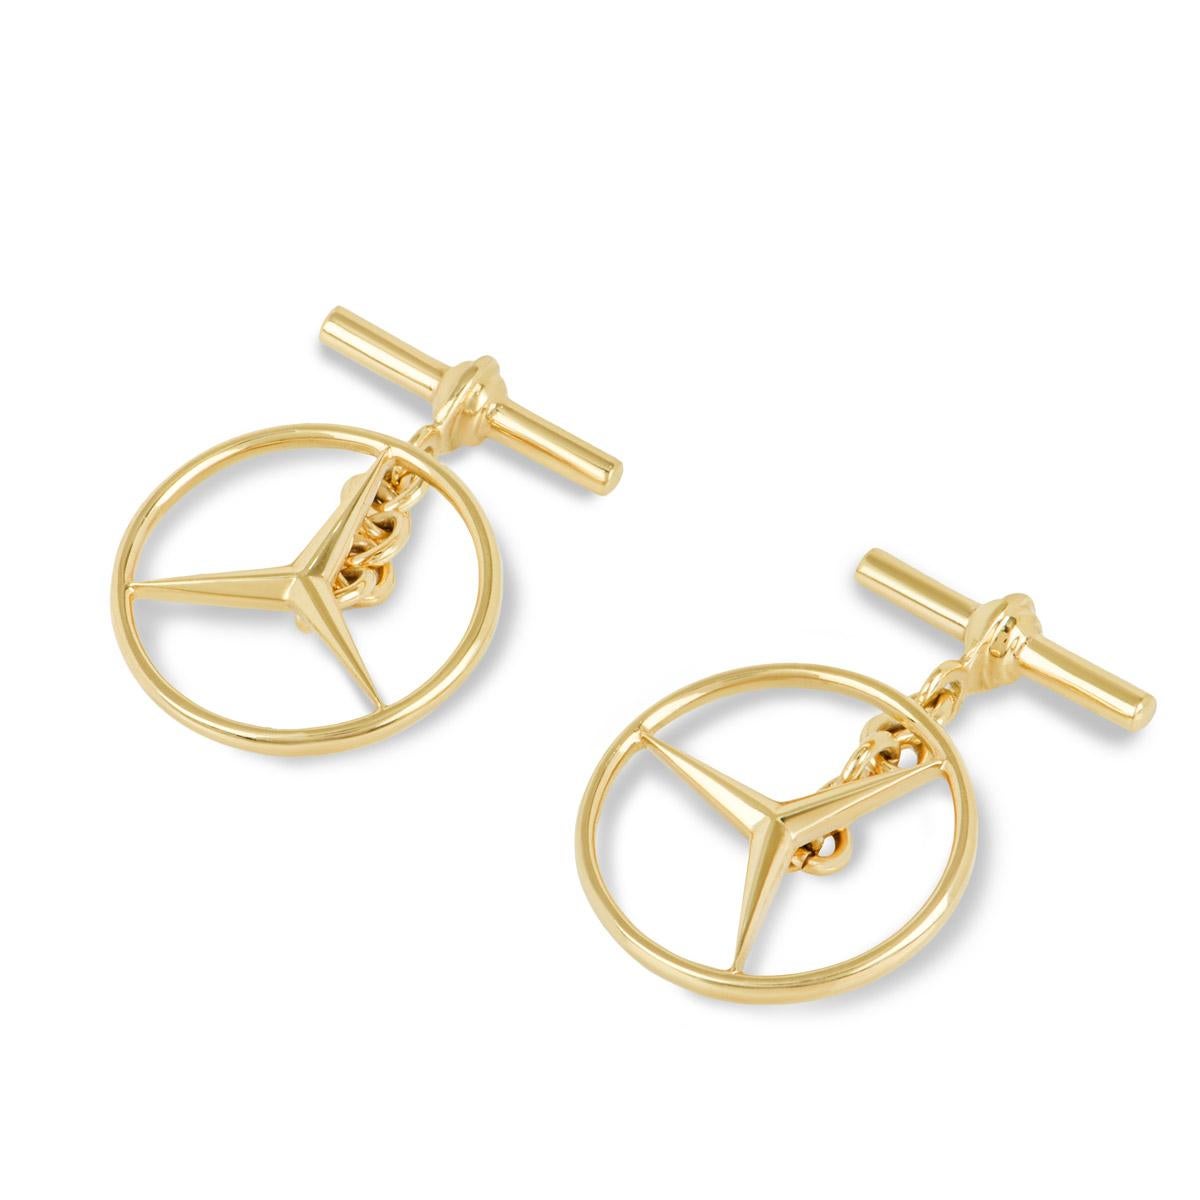 A stylish pair of 18k yellow gold cufflinks. The 2.5cm long cufflinks feature a Mercedes Benz emblem motif, finish with chain and T-bar fittings and have a gross weight of 9.62 grams.

Comes complete with a Rich Diamonds presentation box and our own